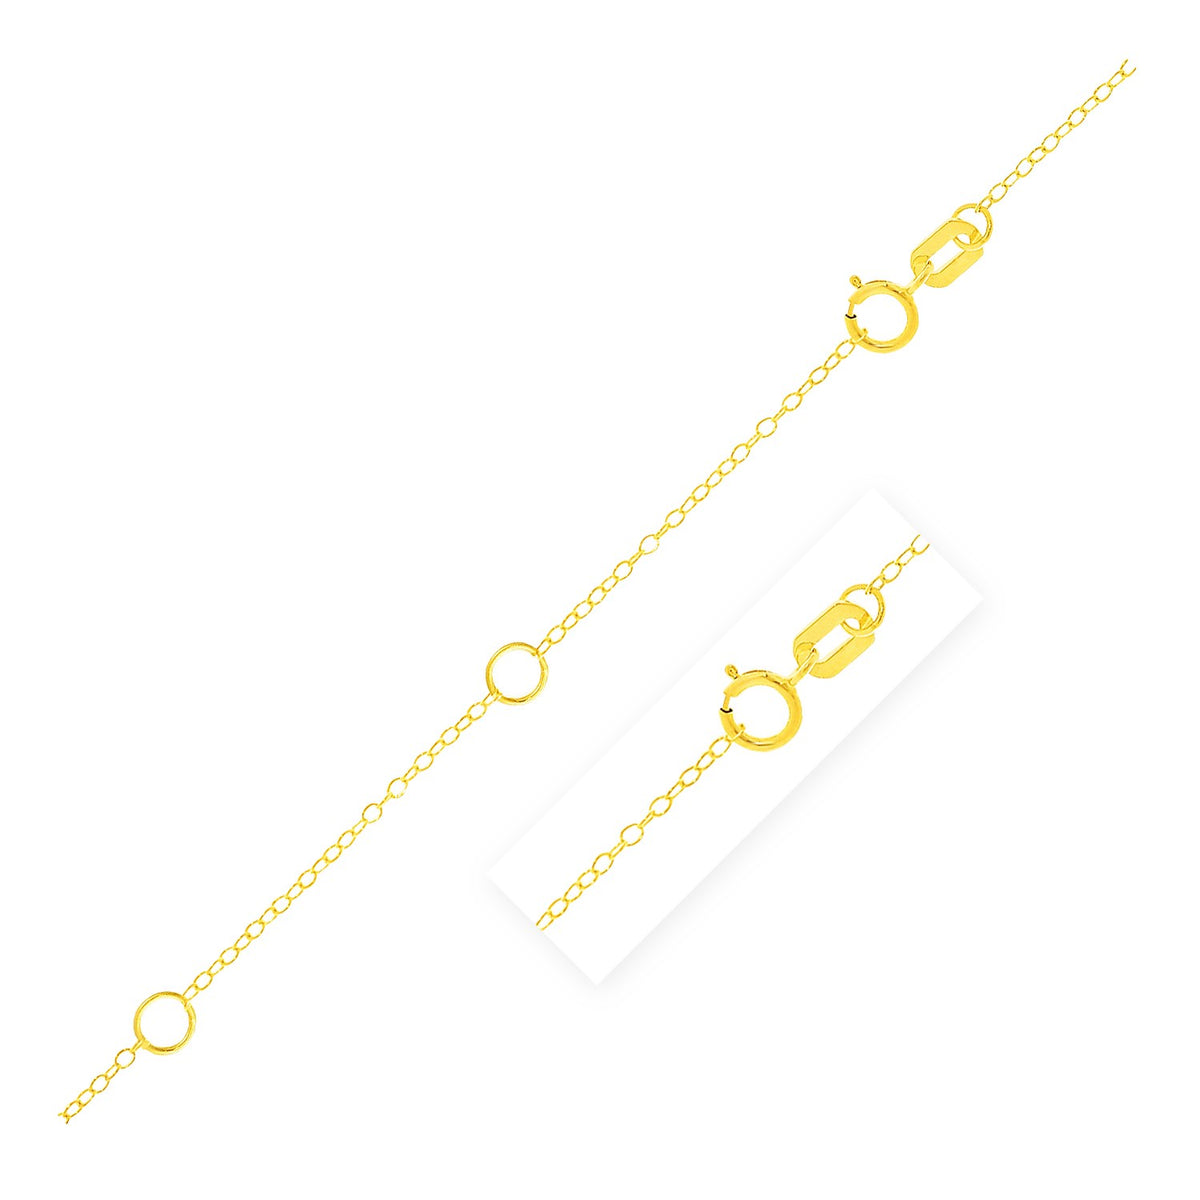 Double Extendable Piatto Chain - 14k Yellow Gold 1.30mm